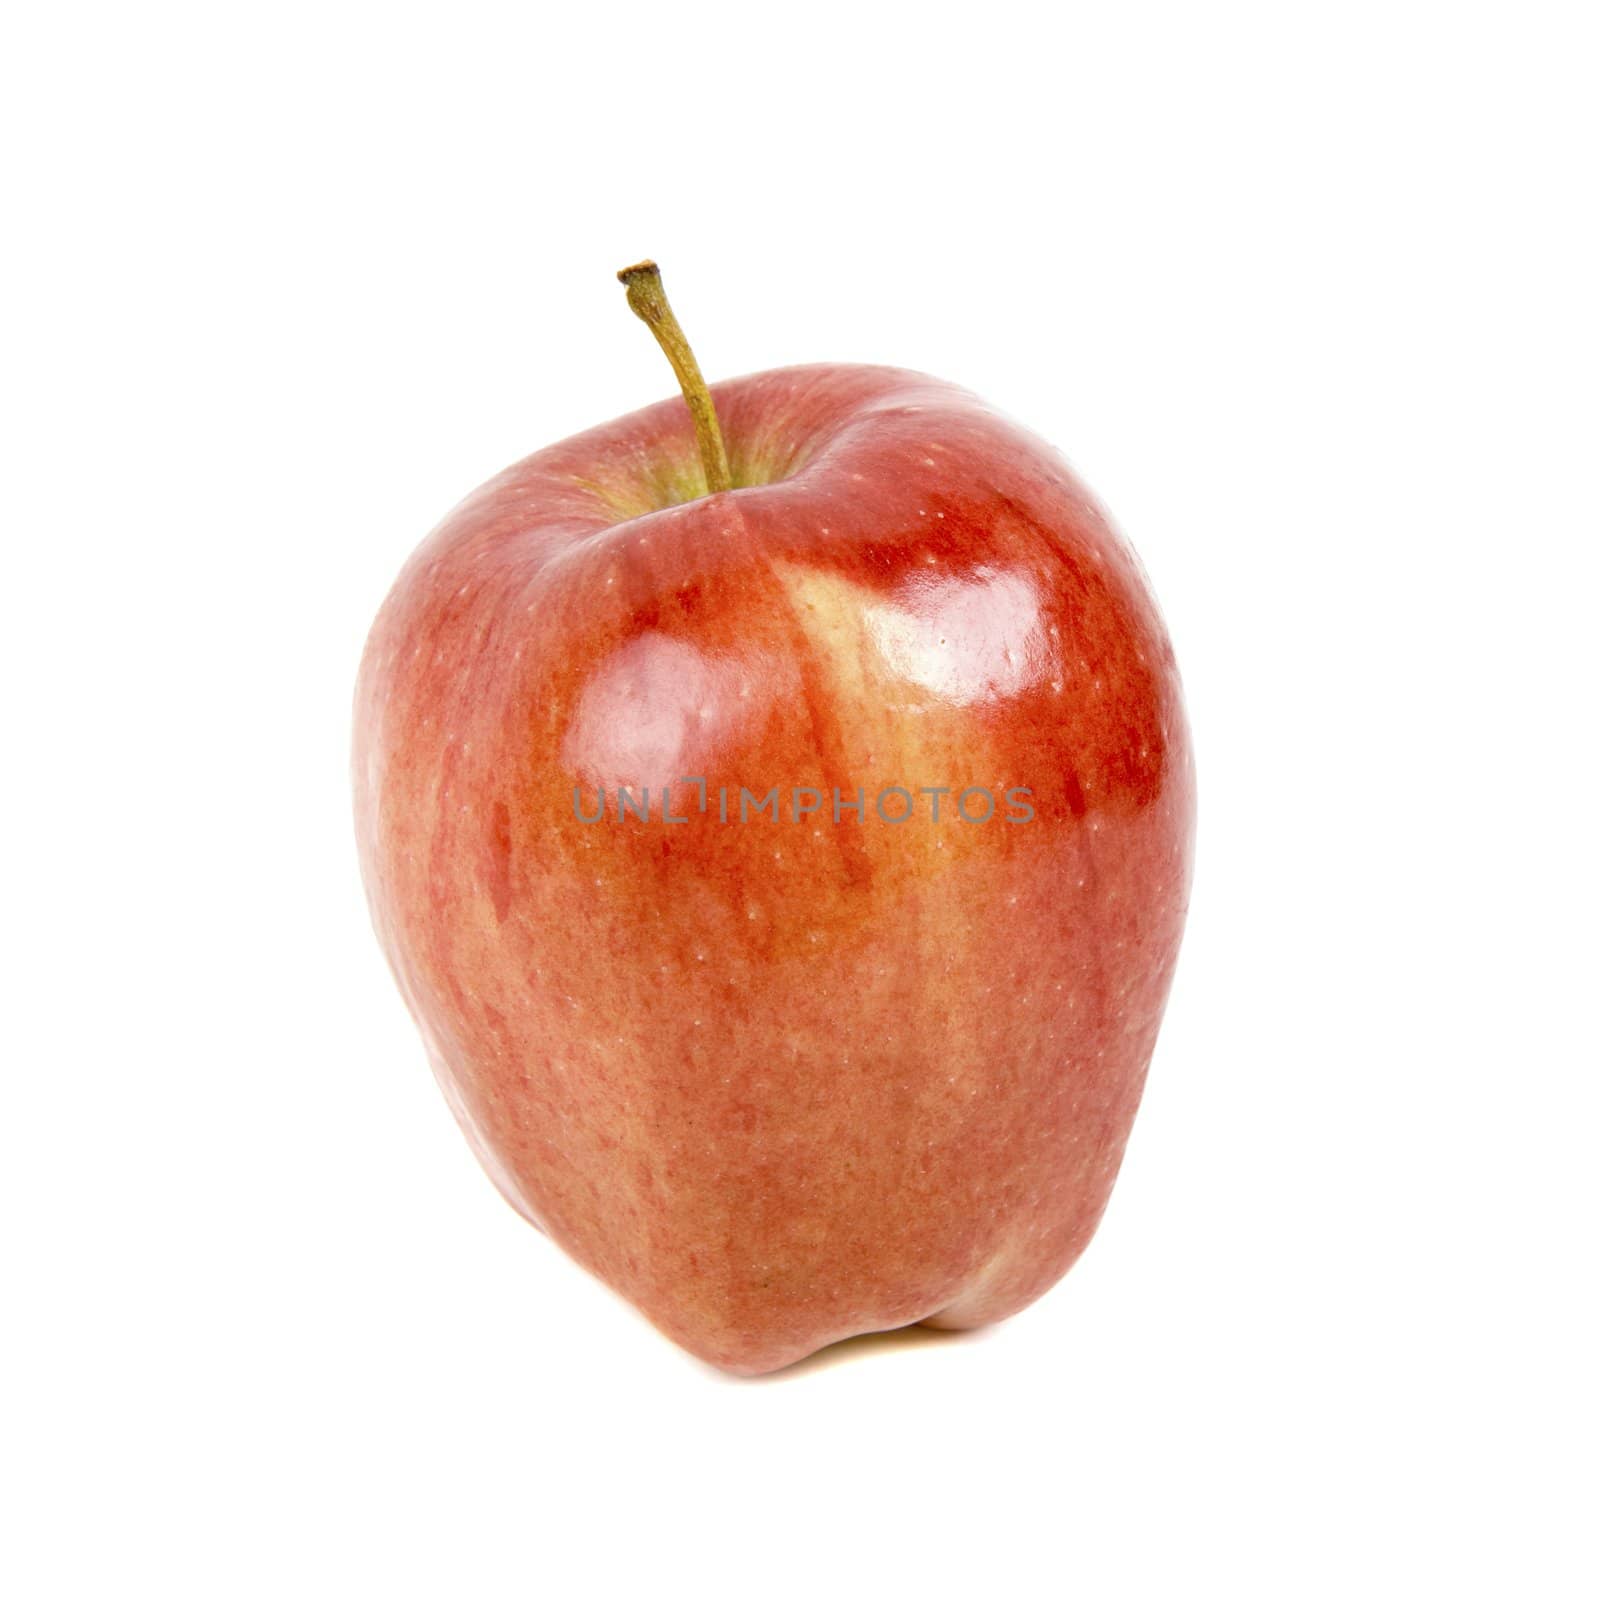 big juicy red apple on white background